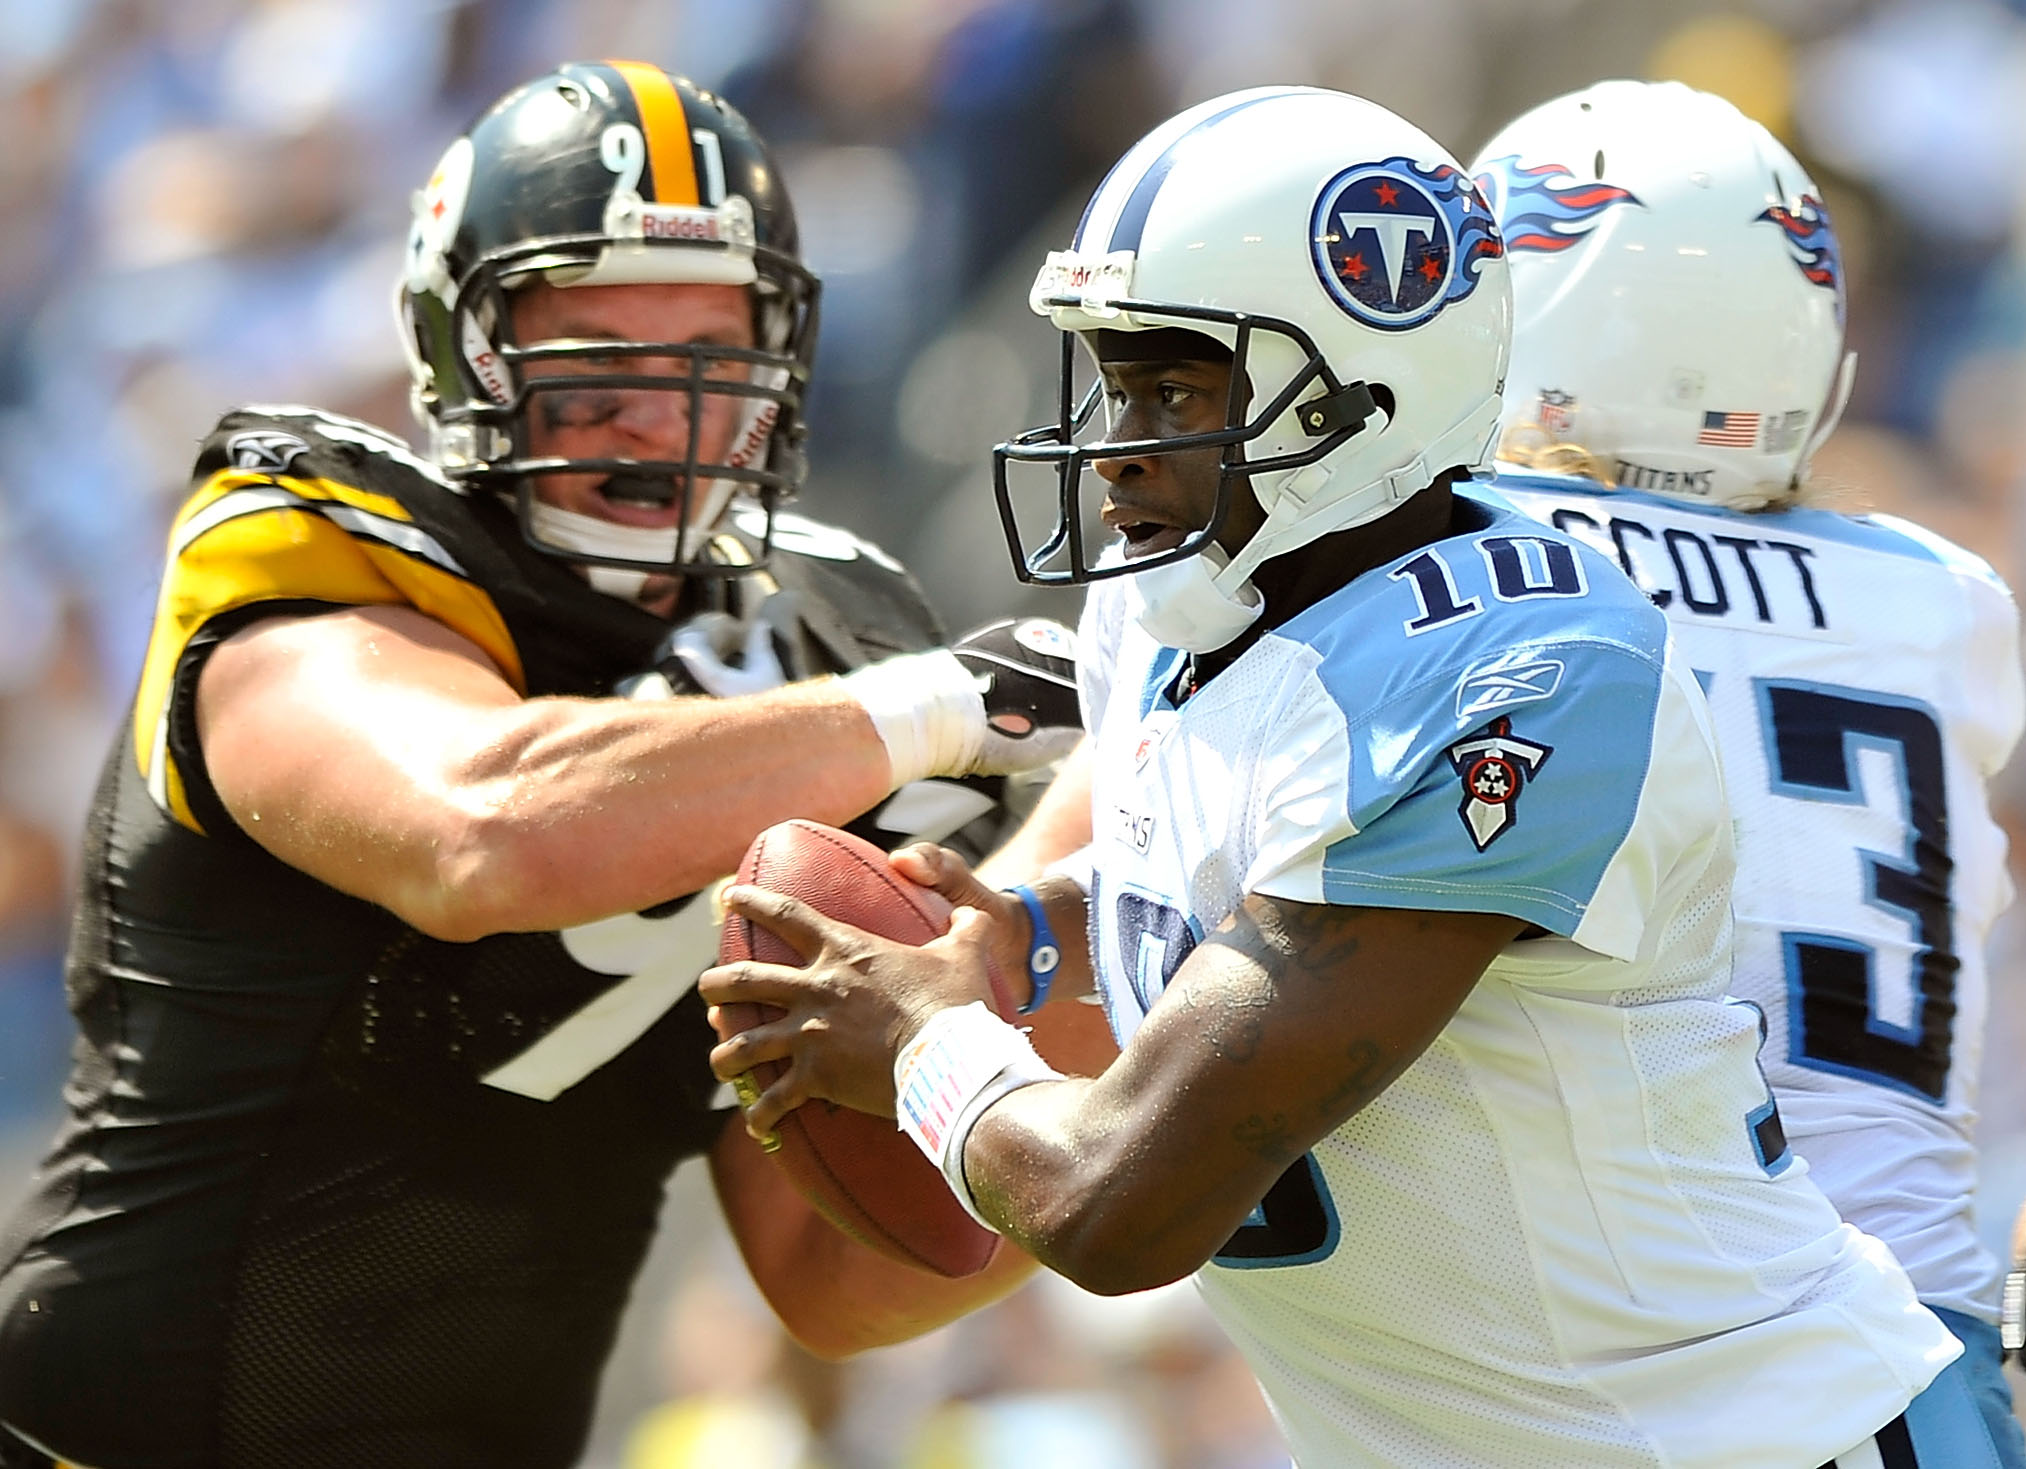 NASHVILLE, TN - SEPTEMBER 19:  Vince Young #10 of the Tennessee Titans rolls out against the Pittsburgh Steelers during the first half at LP Field on September 19, 2010 in Nashville, Tennessee.  (Photo by Grant Halverson/Getty Images)